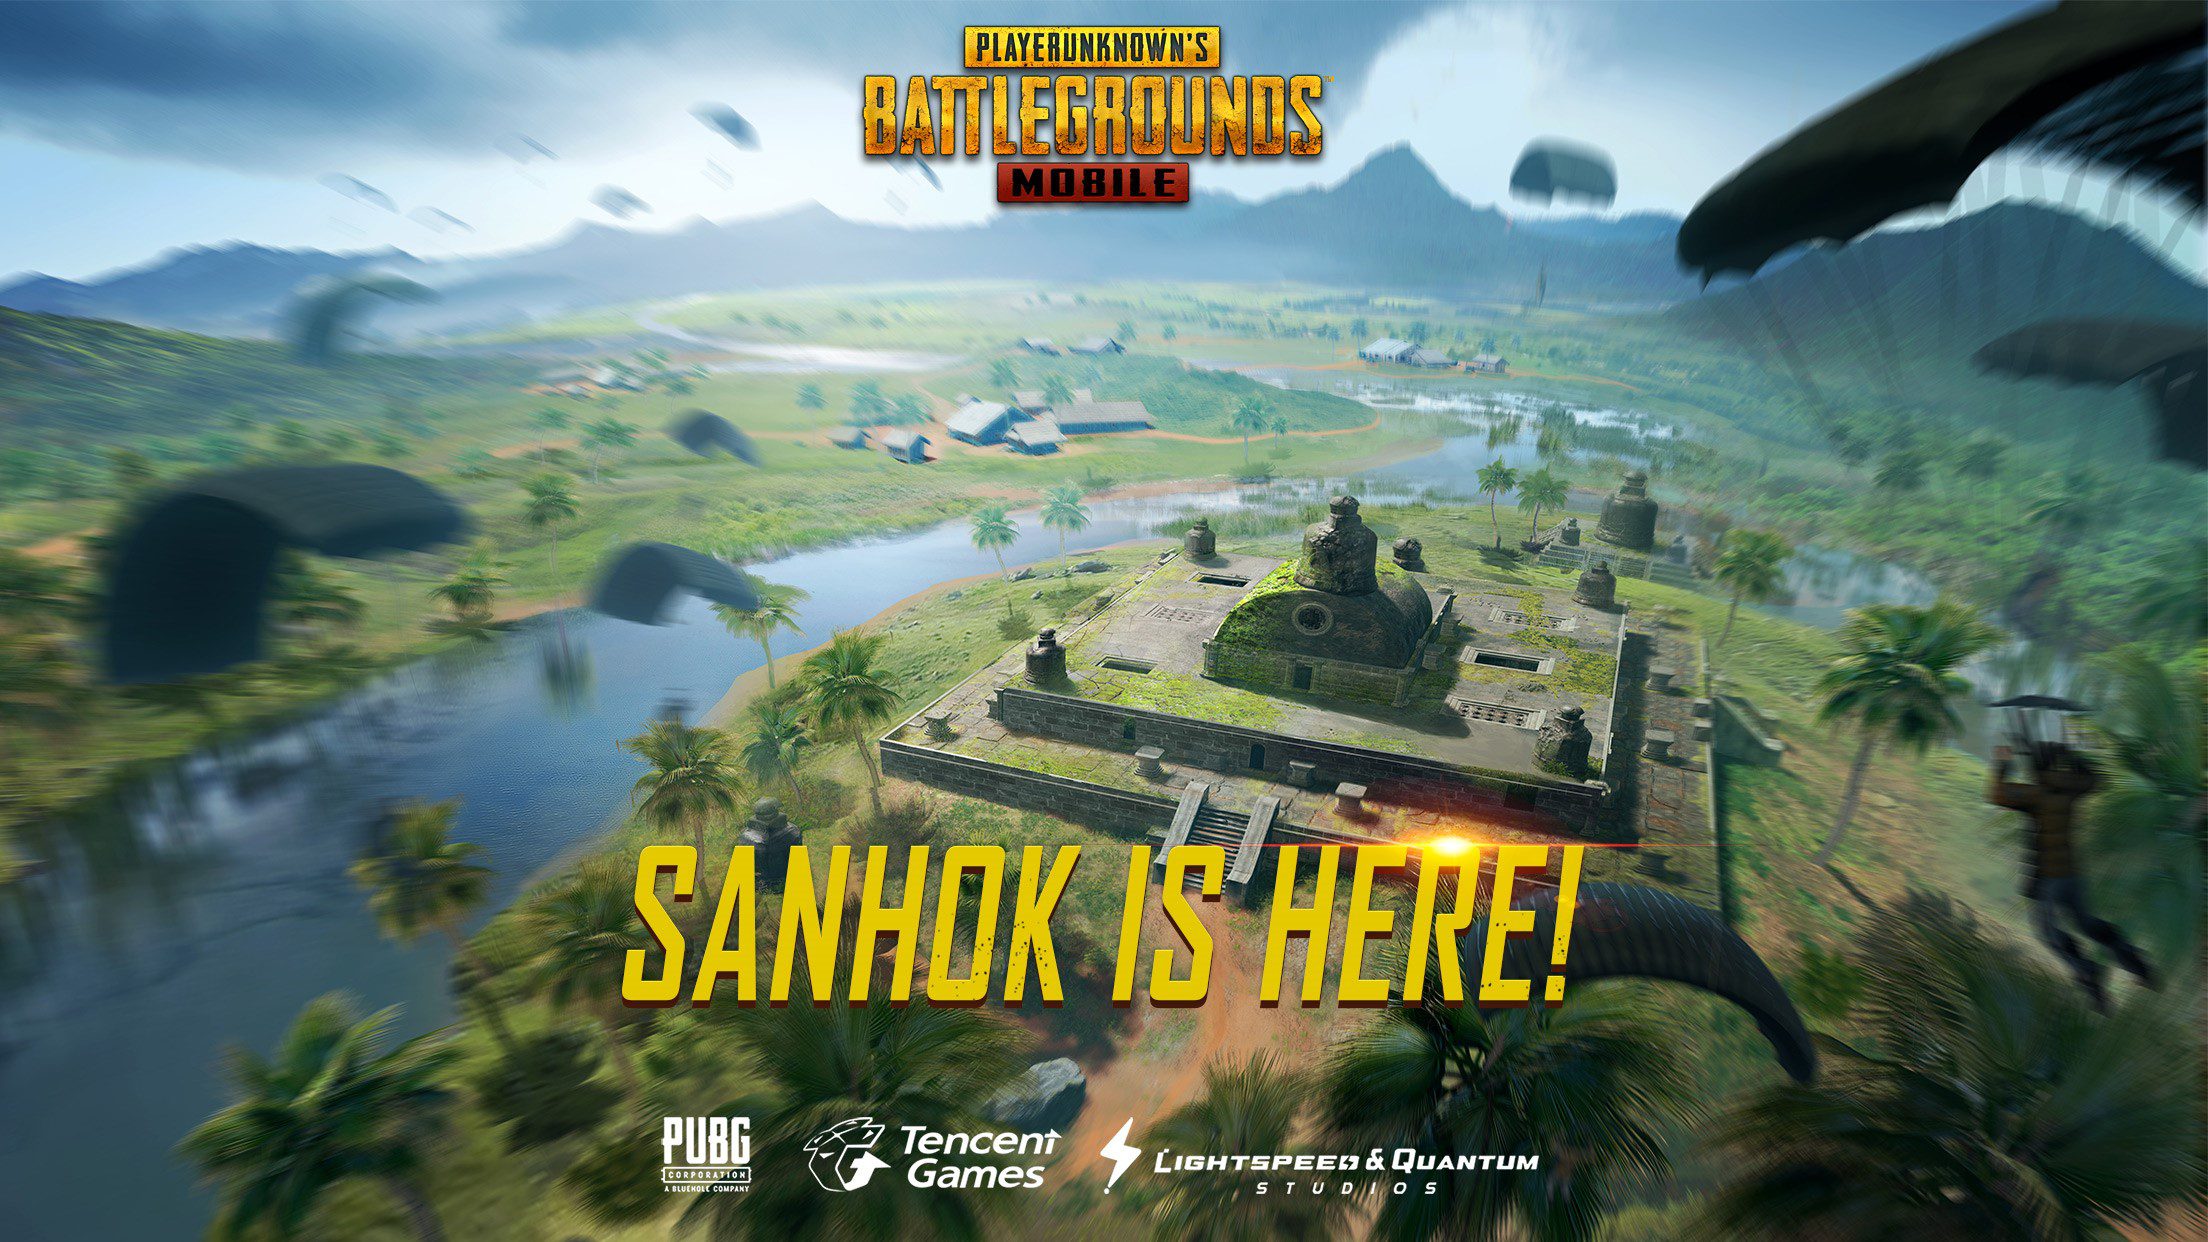 PUBG MOBILE adds Sanhok map along with new weapons and more